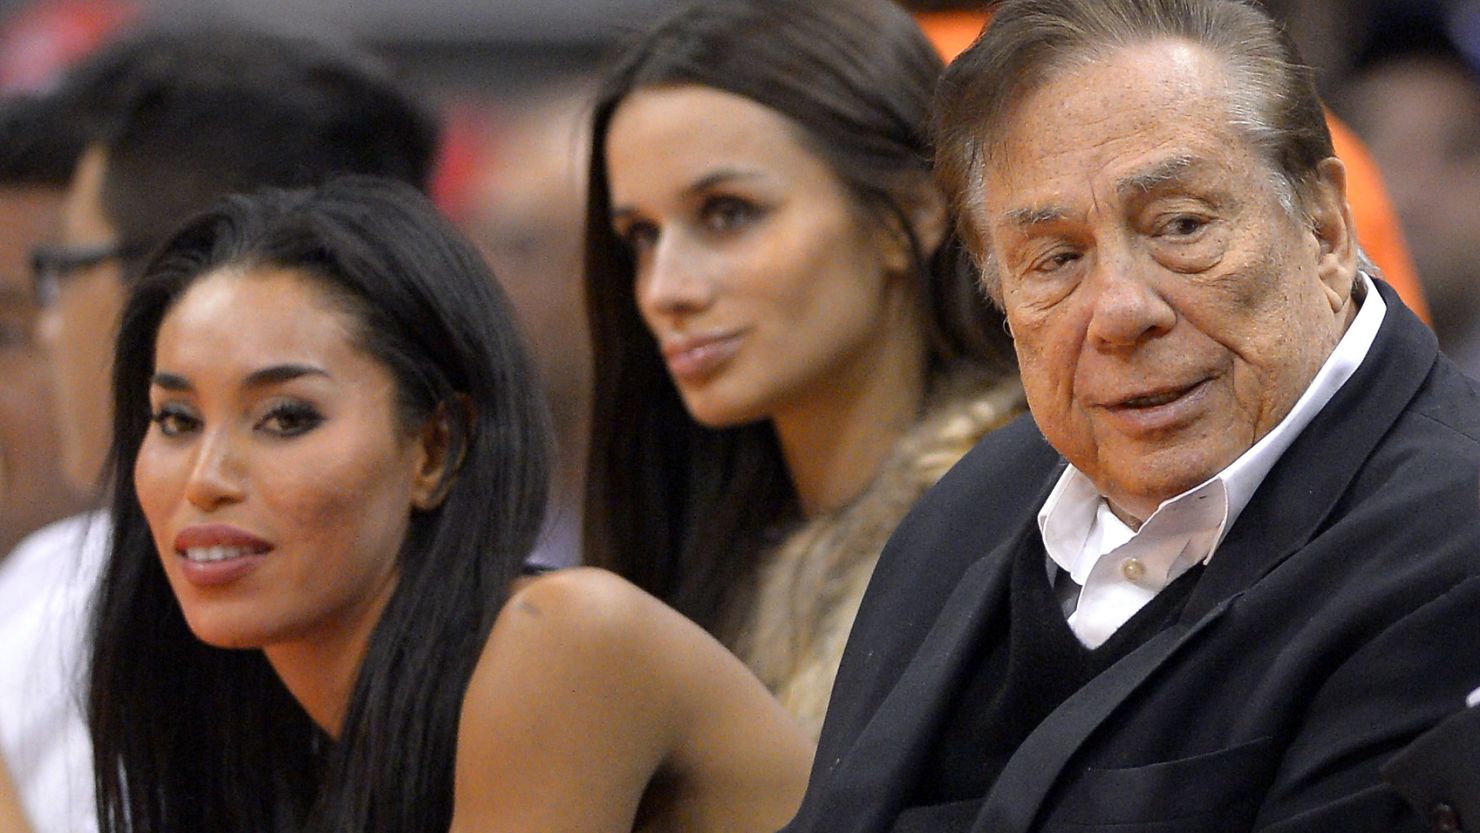 Los Angeles Clippers owner Donald Sterling and V. Stiviano, left, watch a basketball game last year.